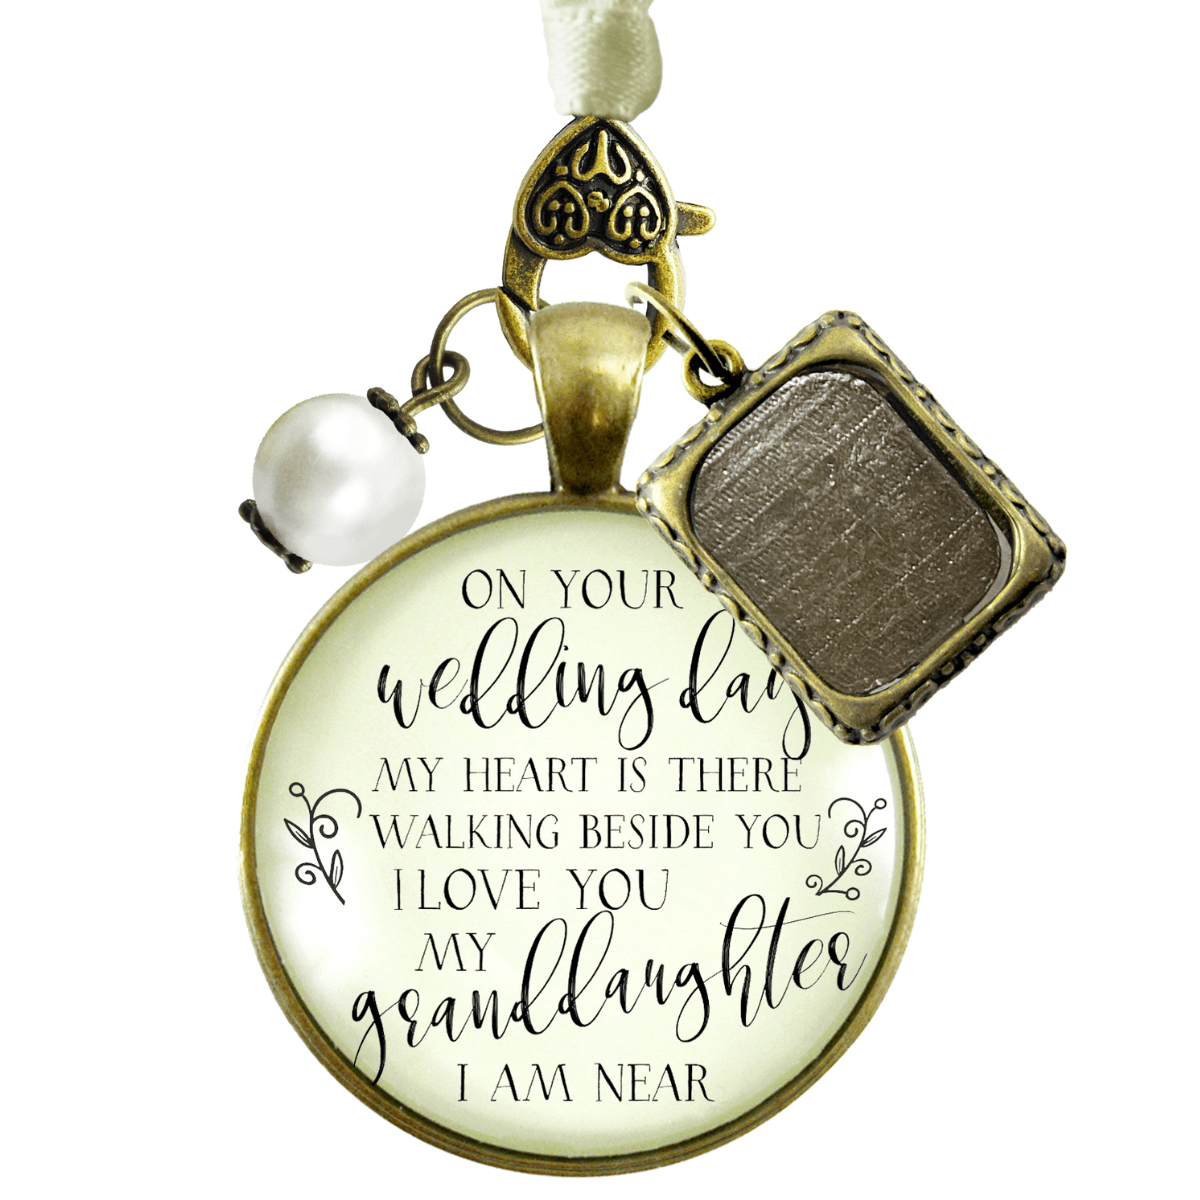 On Your Wedding Day MY Heart Is There Walking Beside You GRANDDAUGHTER - BRONZE - CREAM - WHITE BEAD